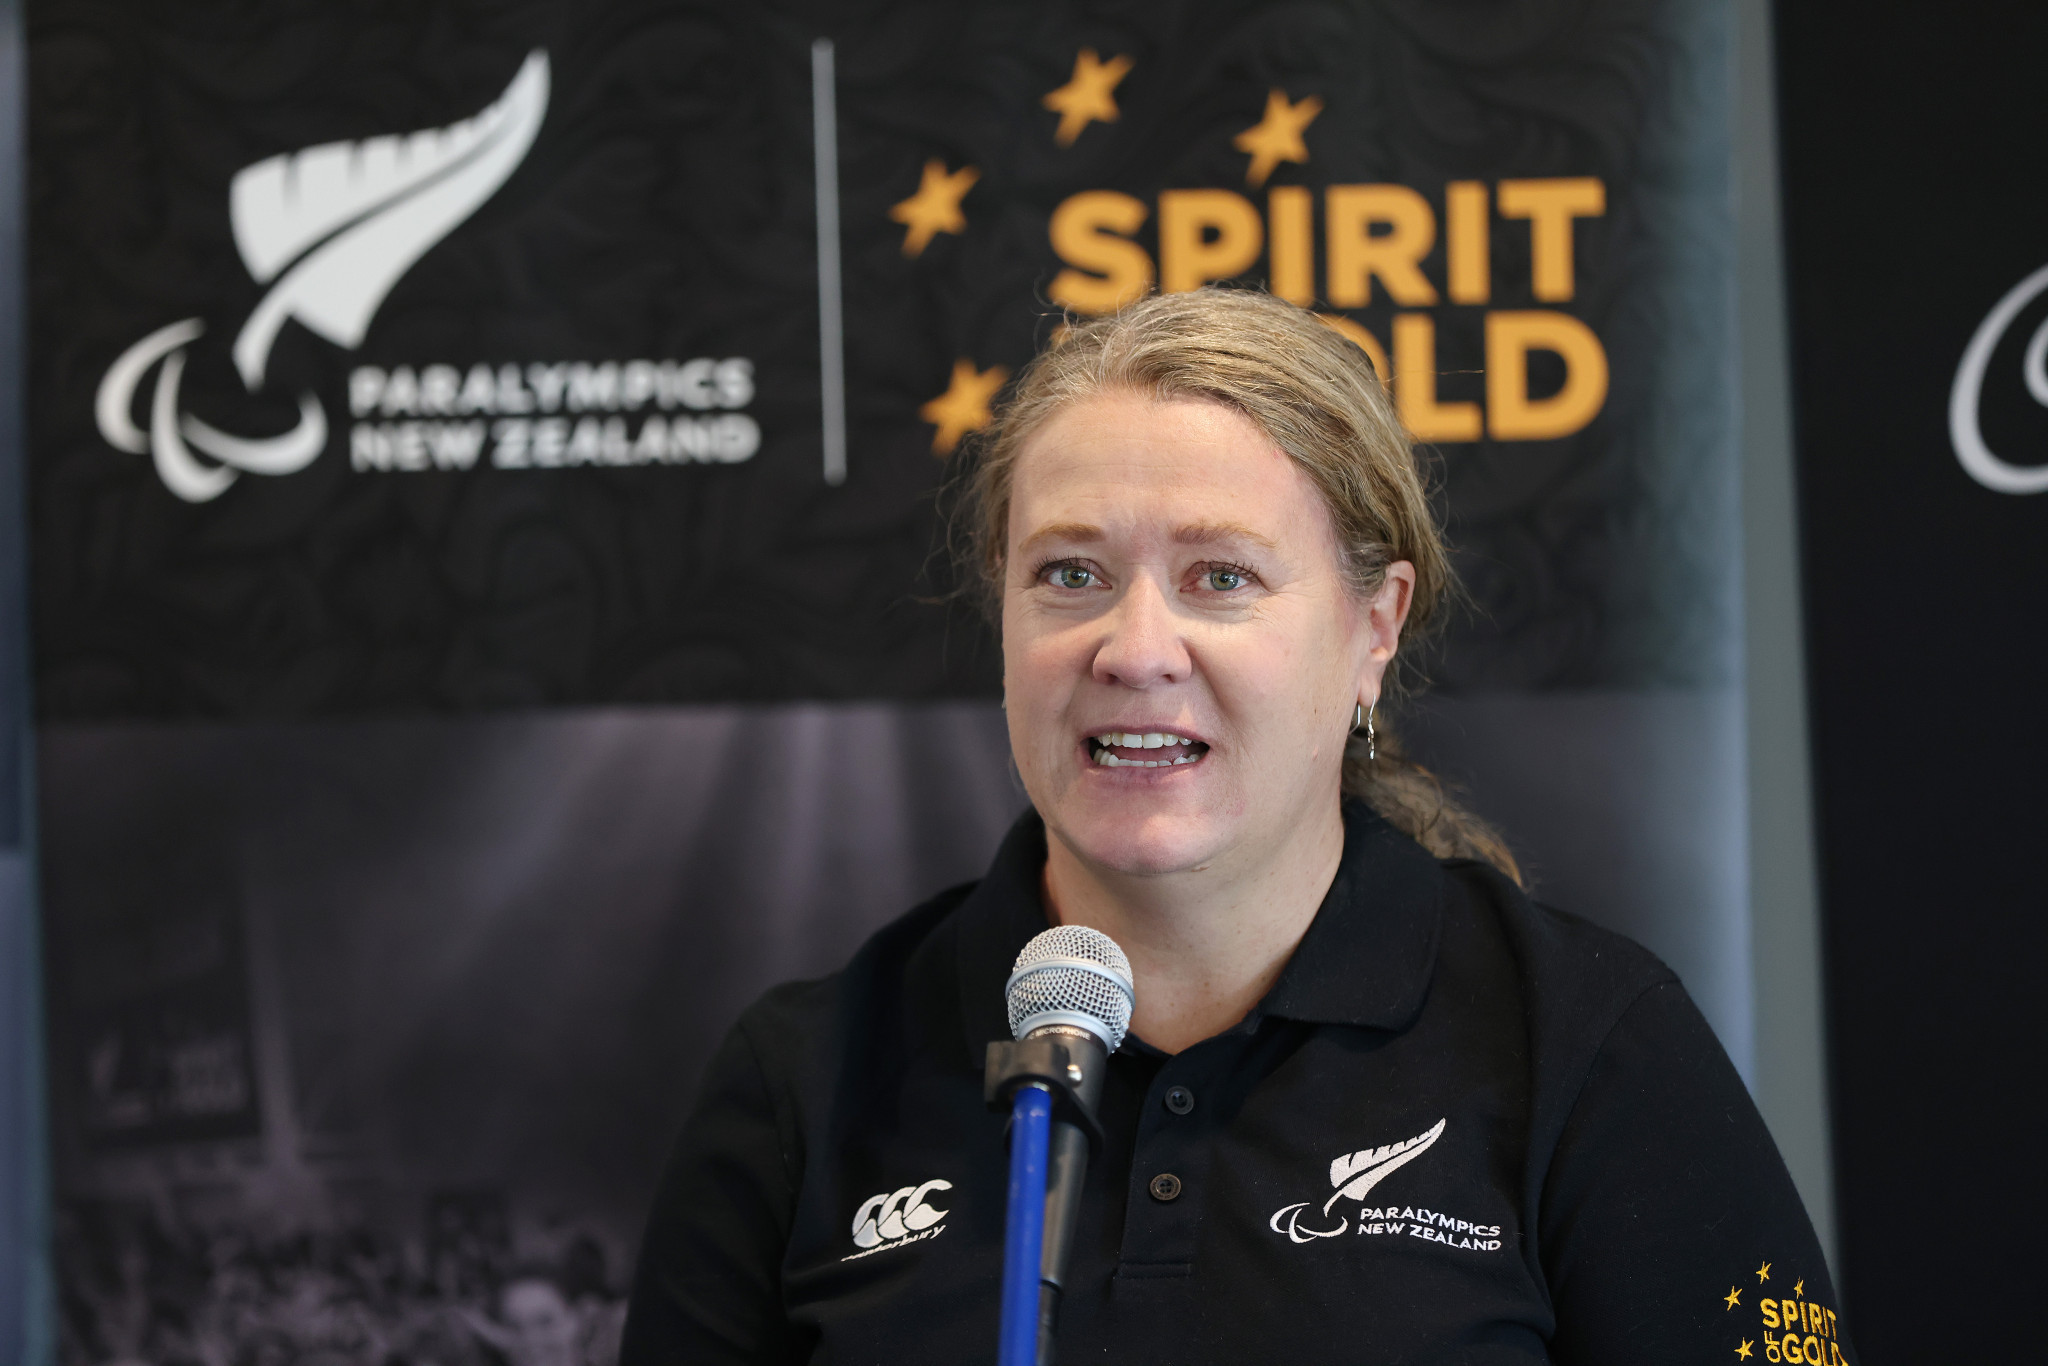 Allan to step down as Paralympics New Zealand chief executive